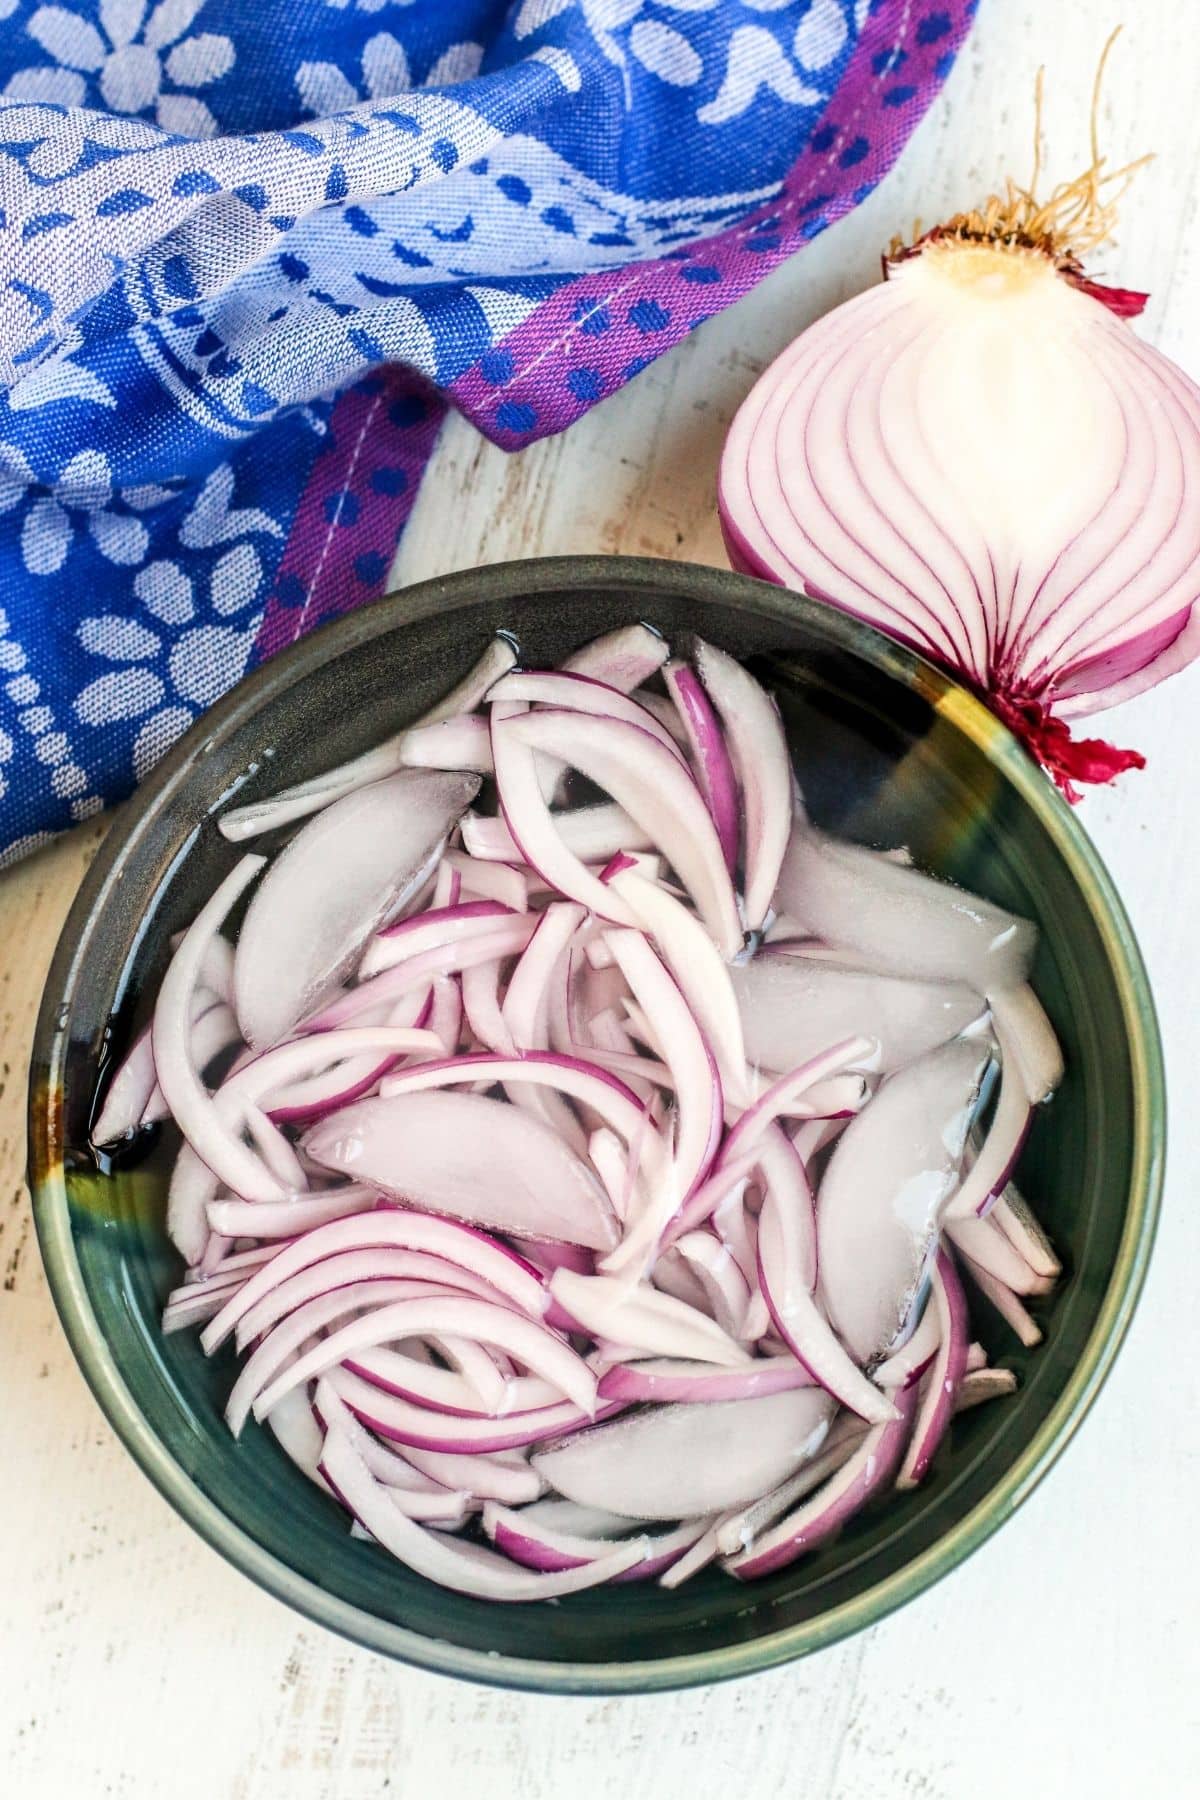 Onion slices soaking in a bowl of ice water.